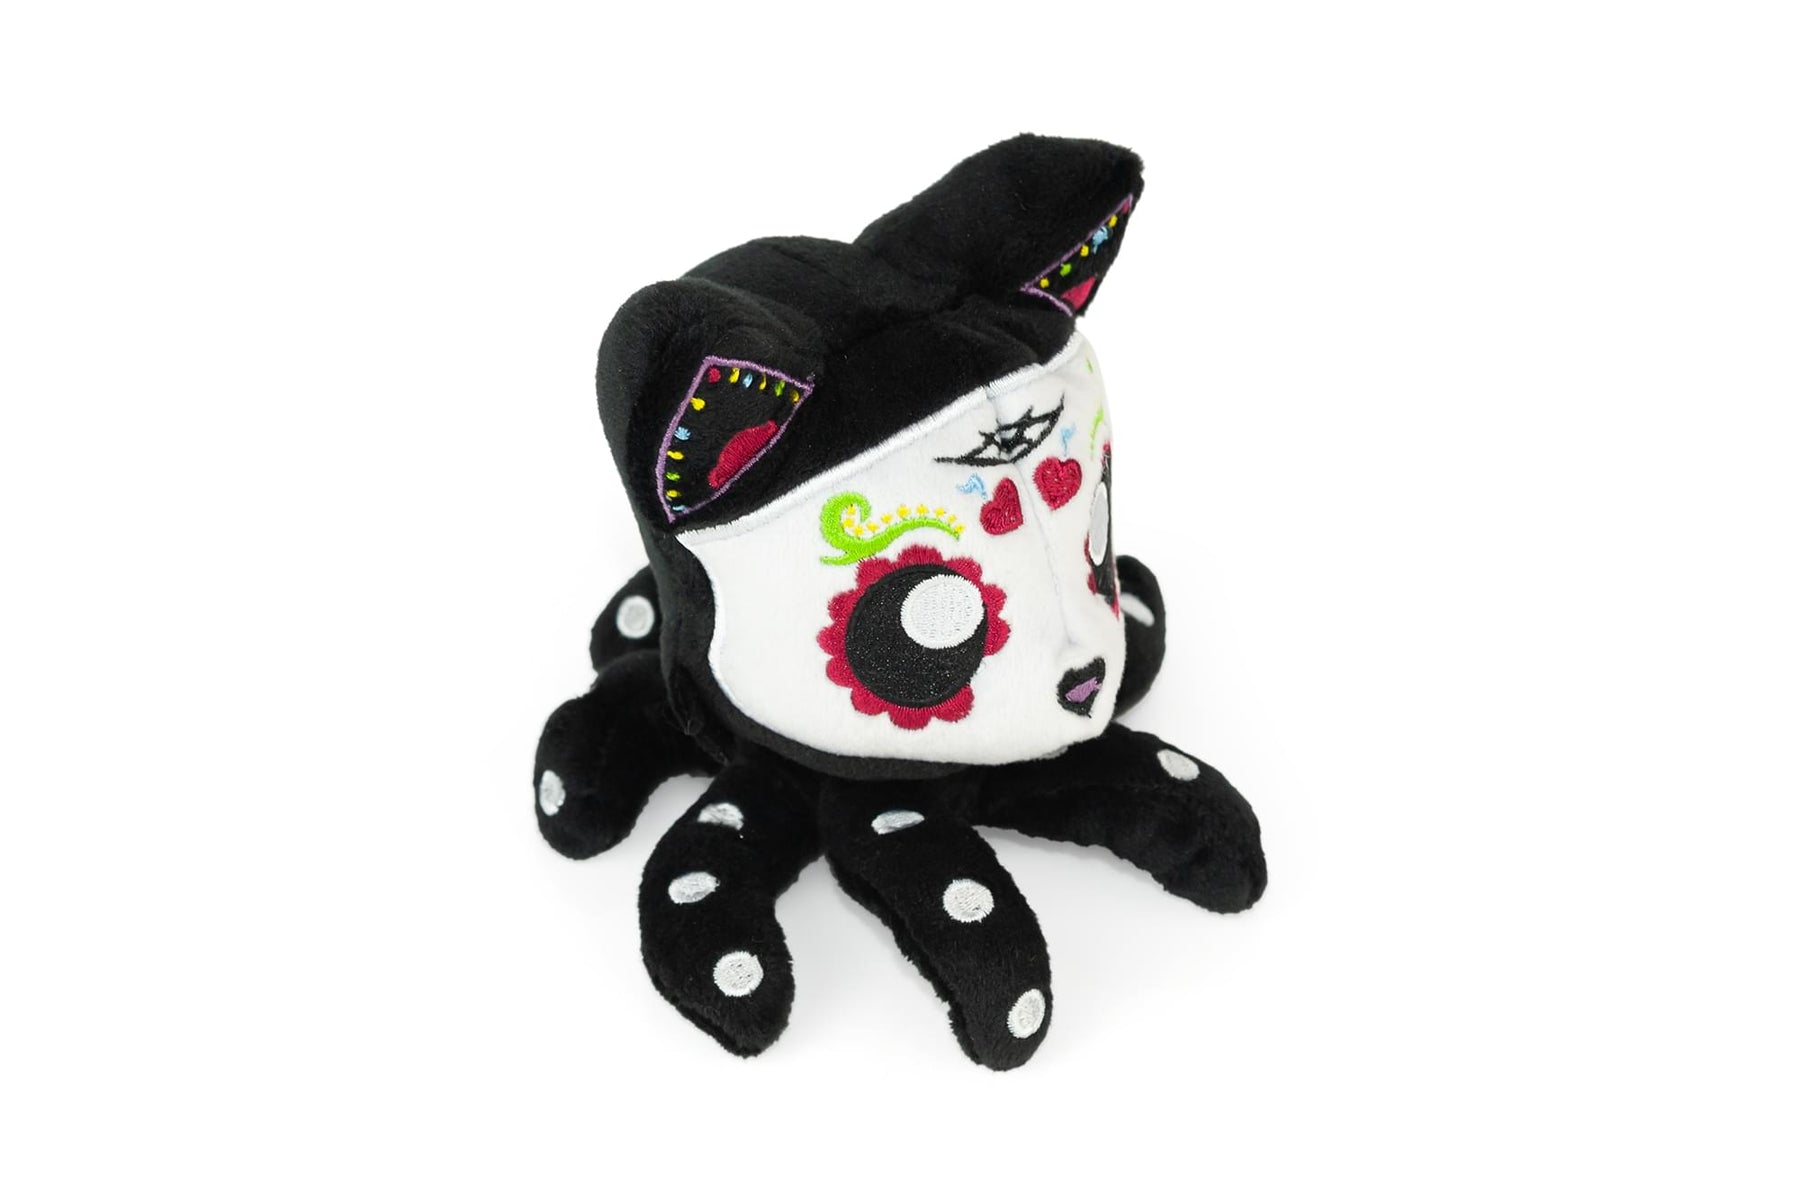 Tentacle Kitty 4 Inch Little Ones Plush | Day Of The Dead Sugar Skull Design